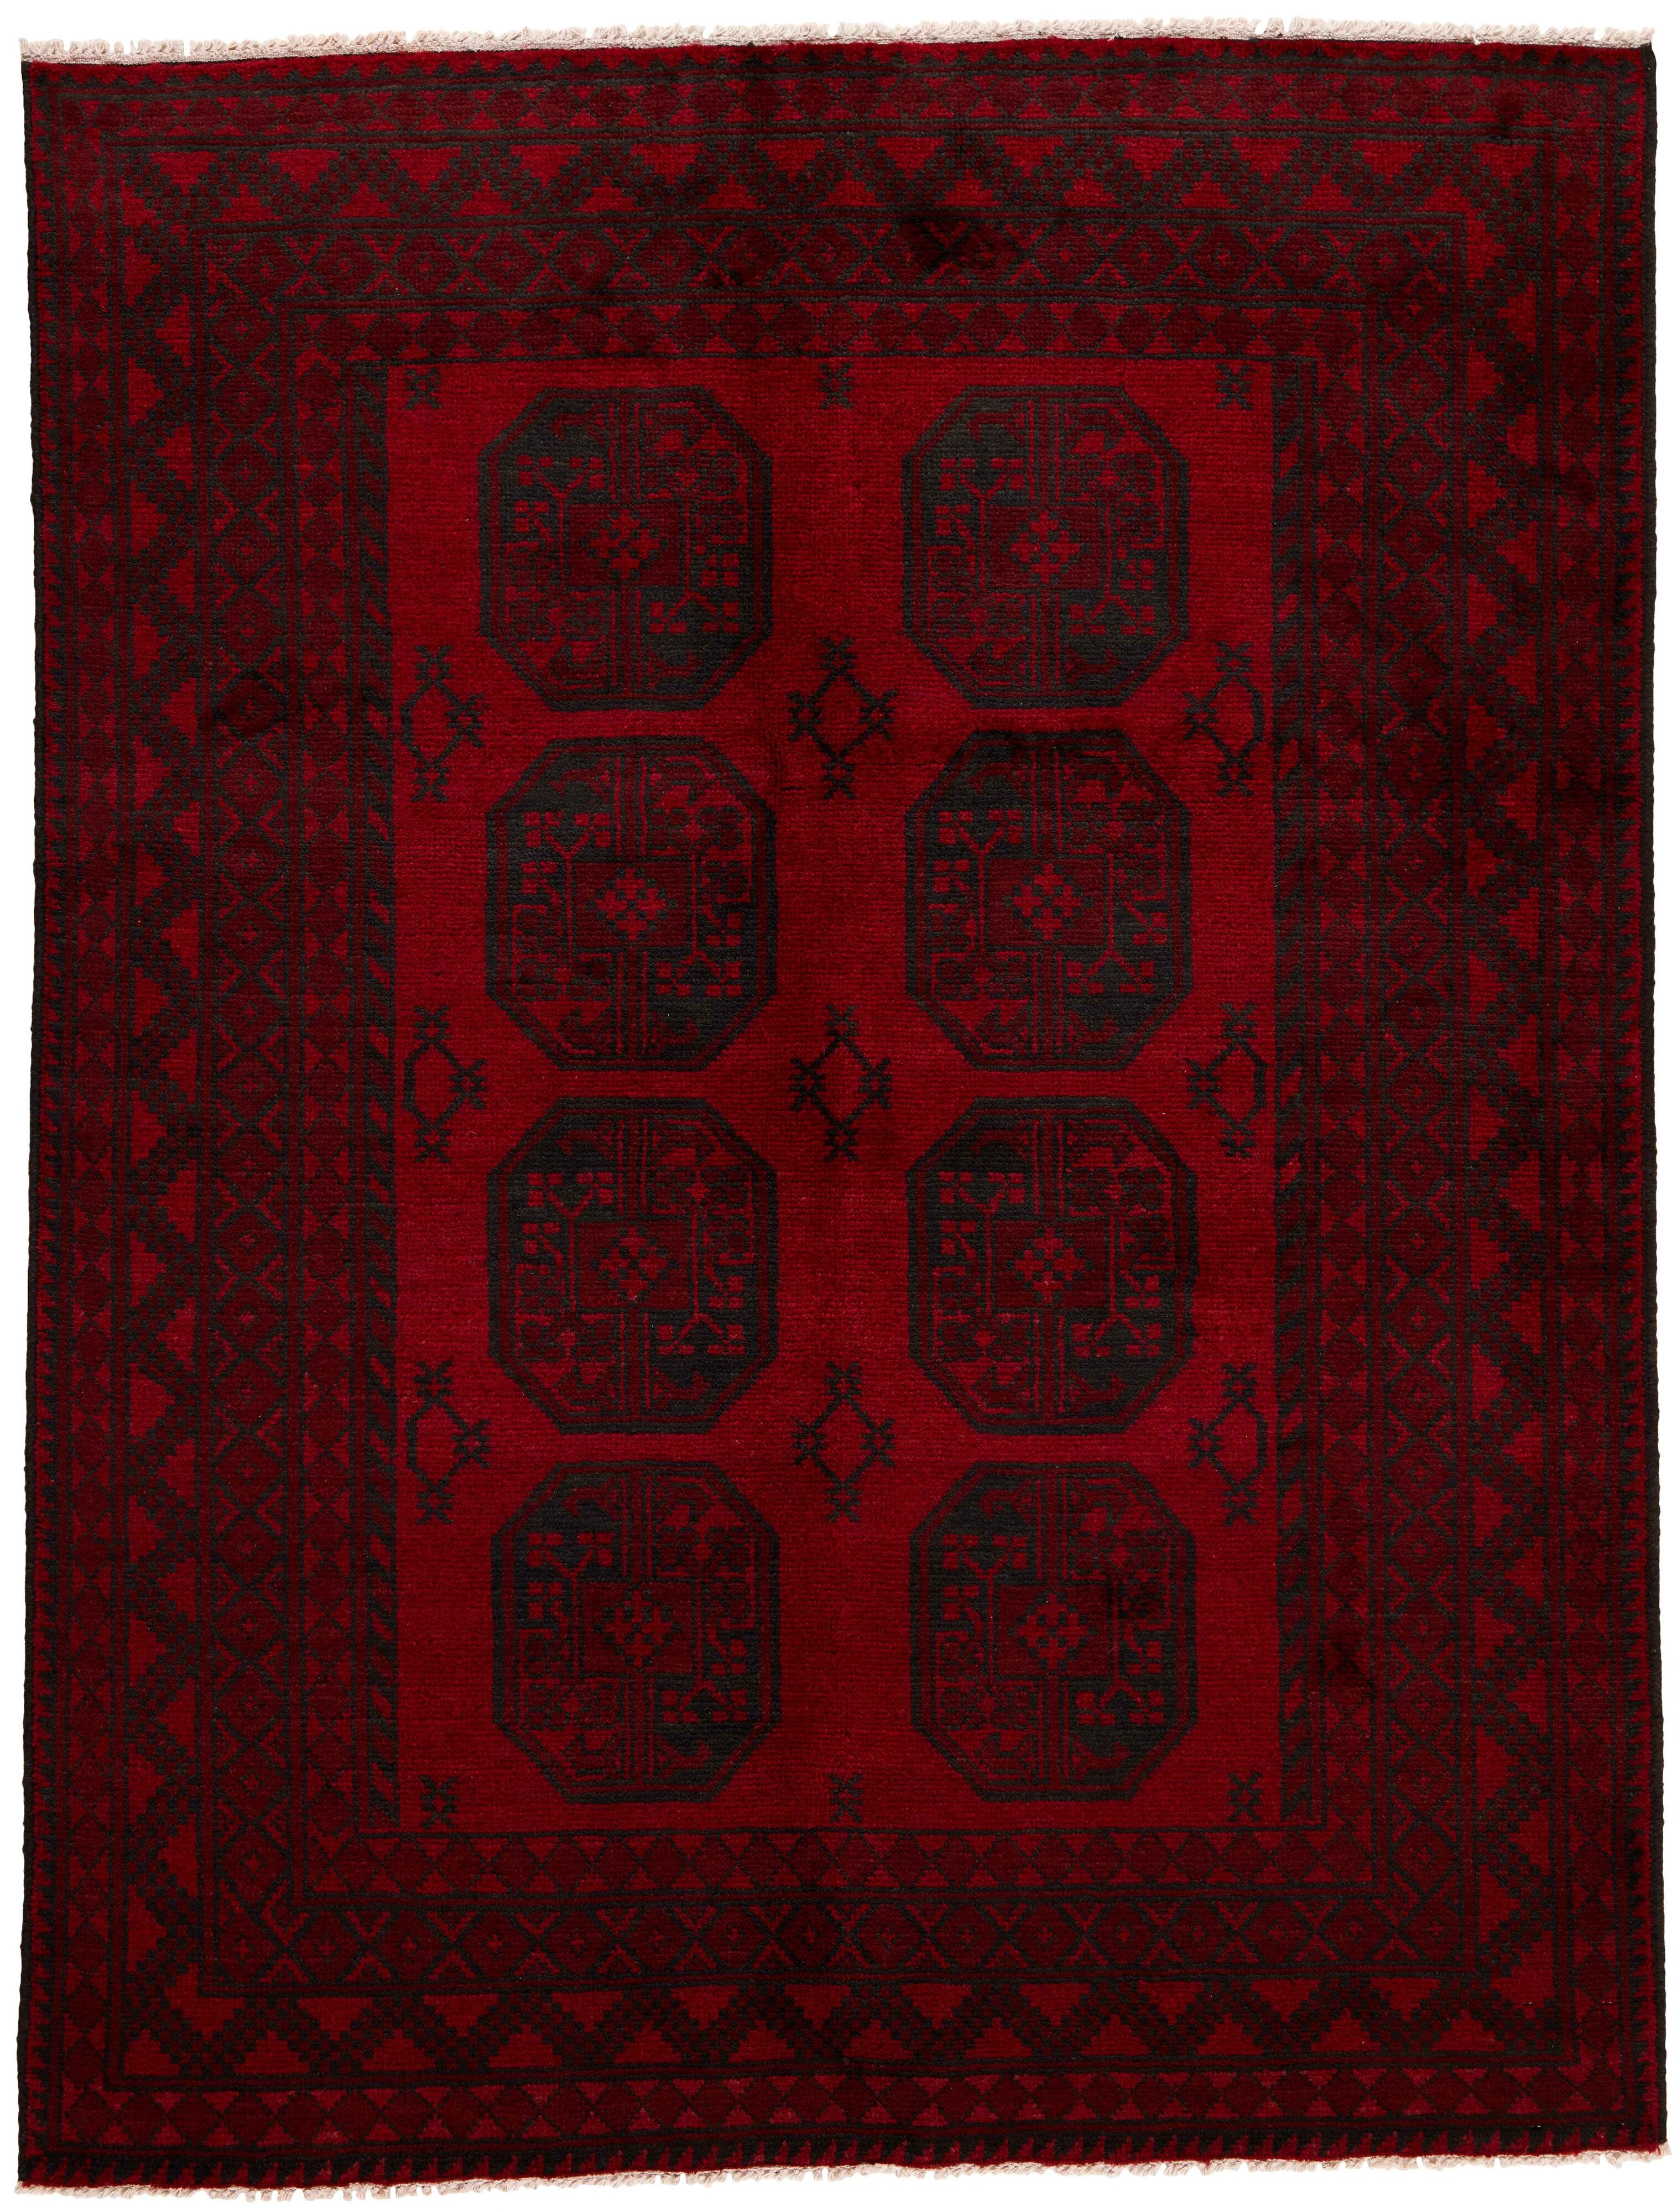 Red oriental rug with traditional Elephant's foot pattern